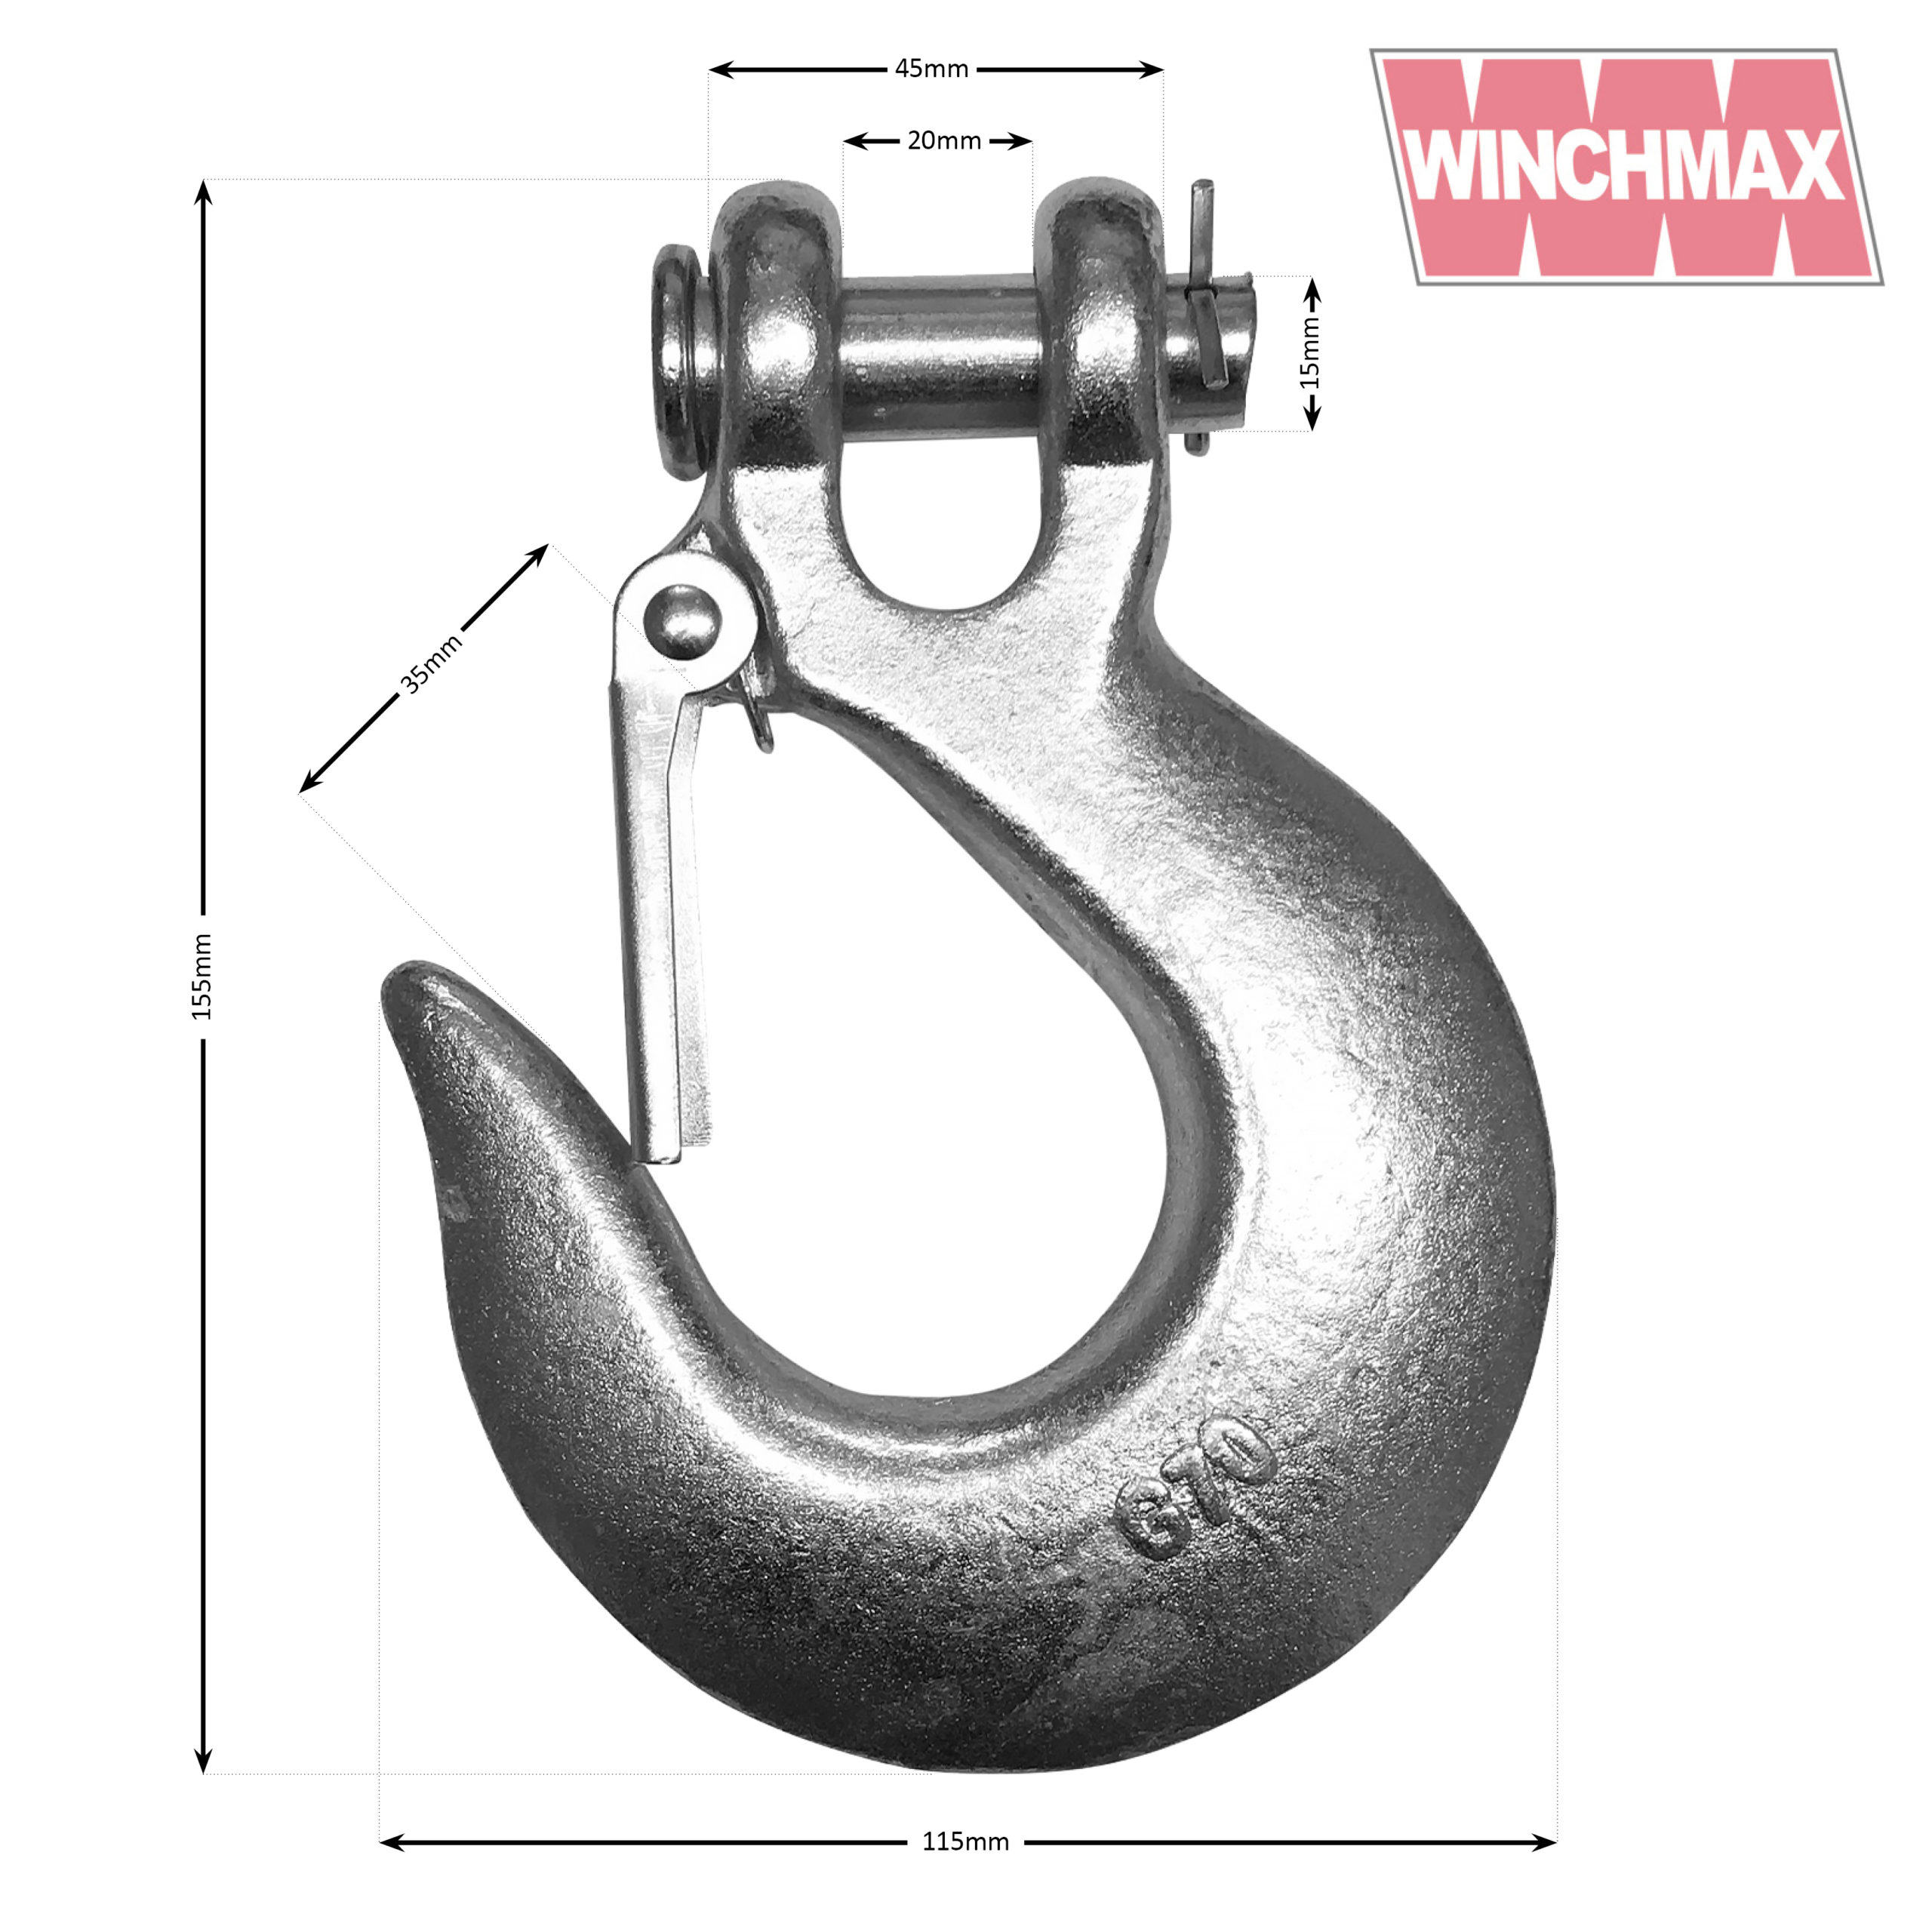 Winchmax 1/2 Inch Clevis Hook